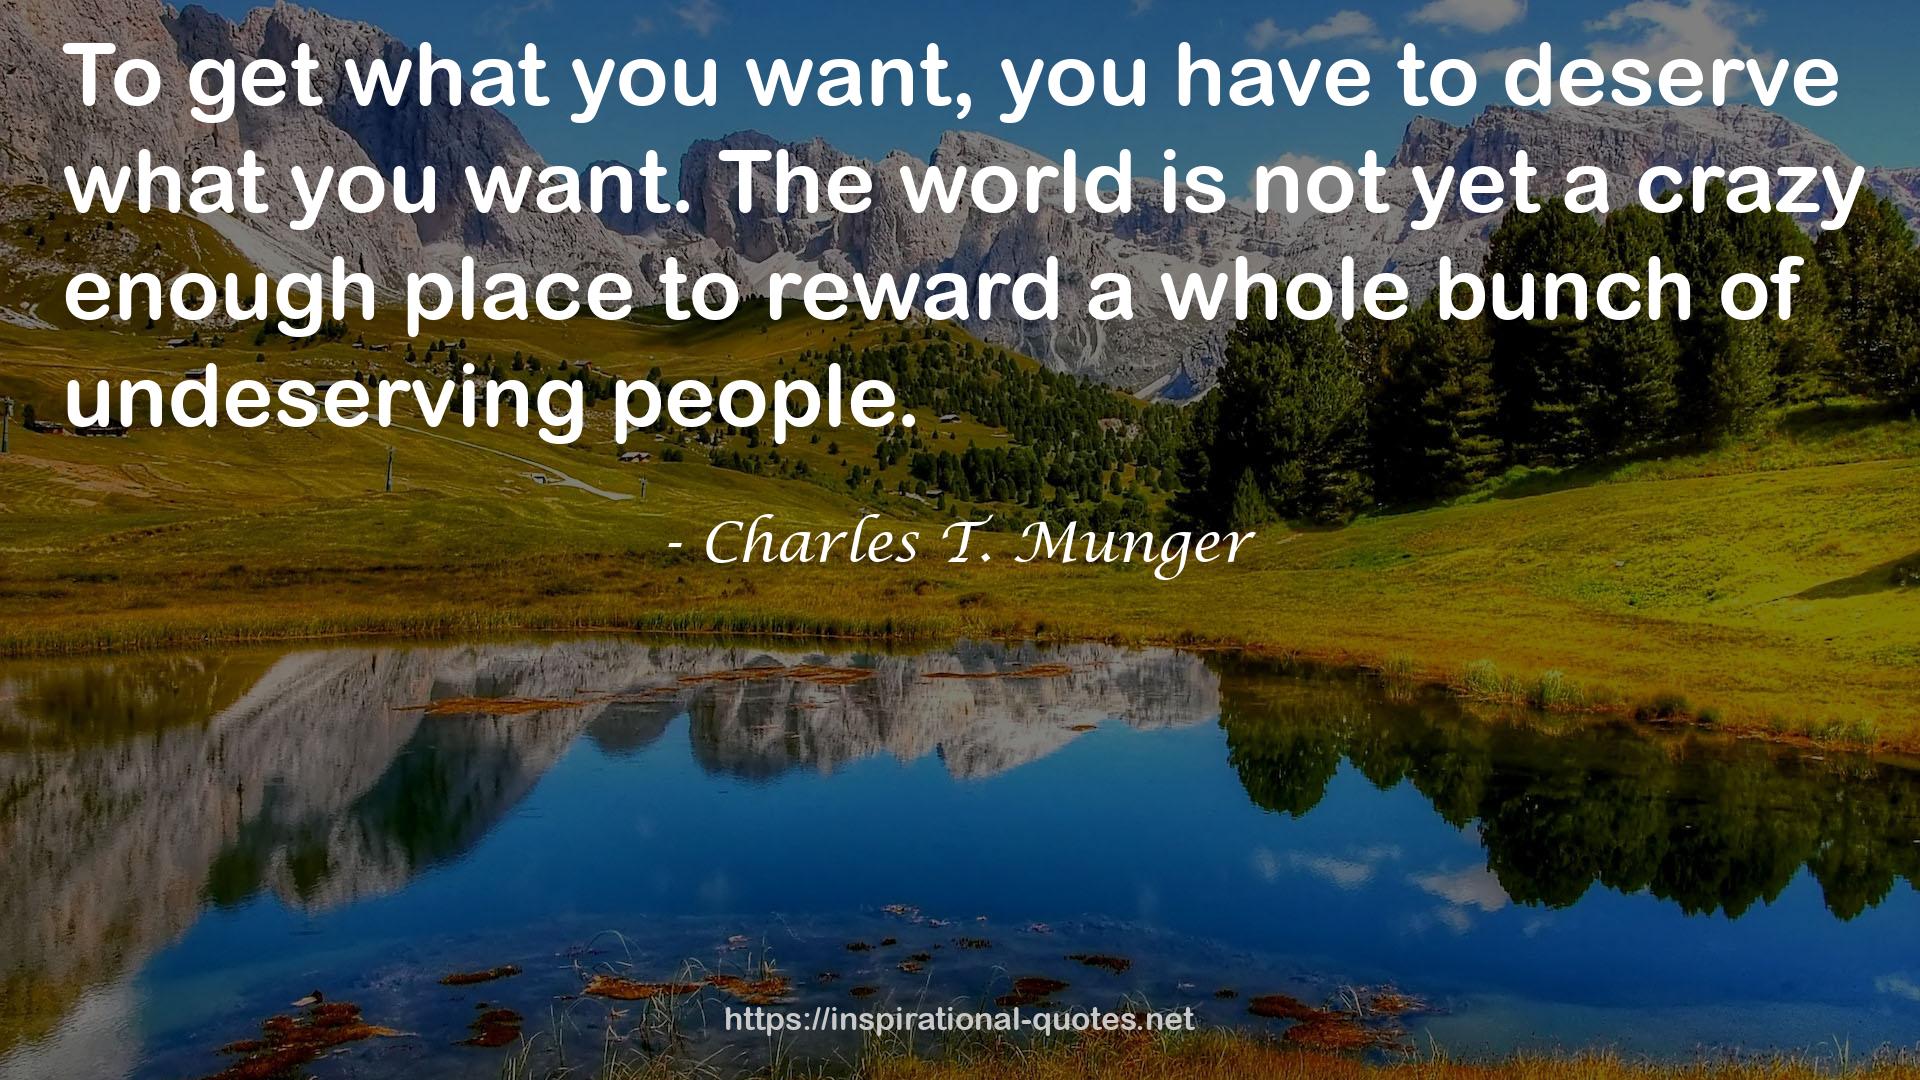 Charles T. Munger QUOTES